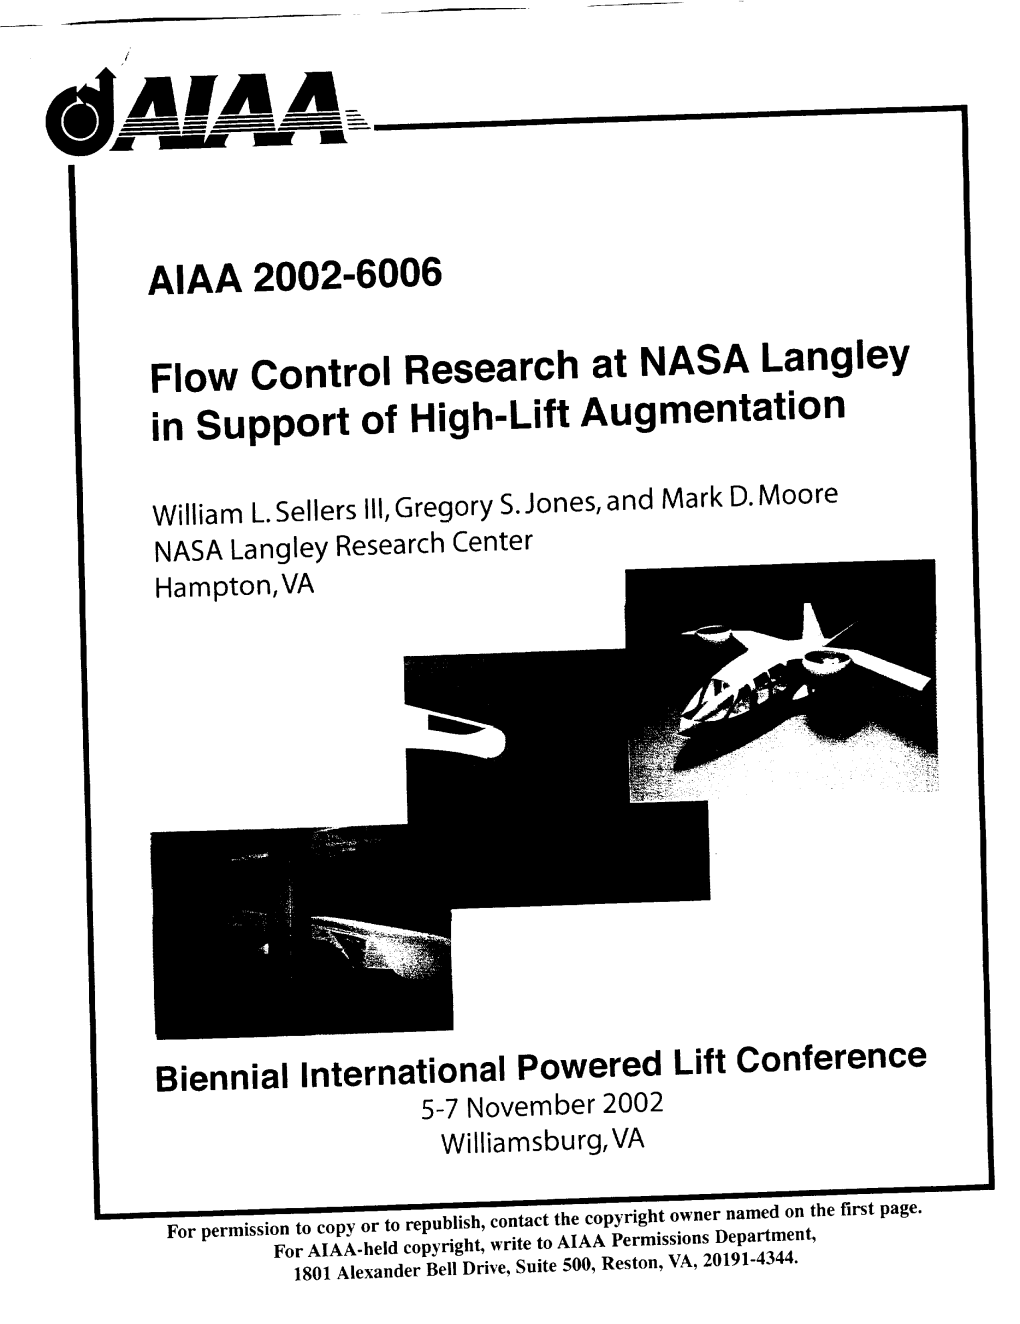 AIAA 2002-6006 Flow Control Research at NASA Langley In